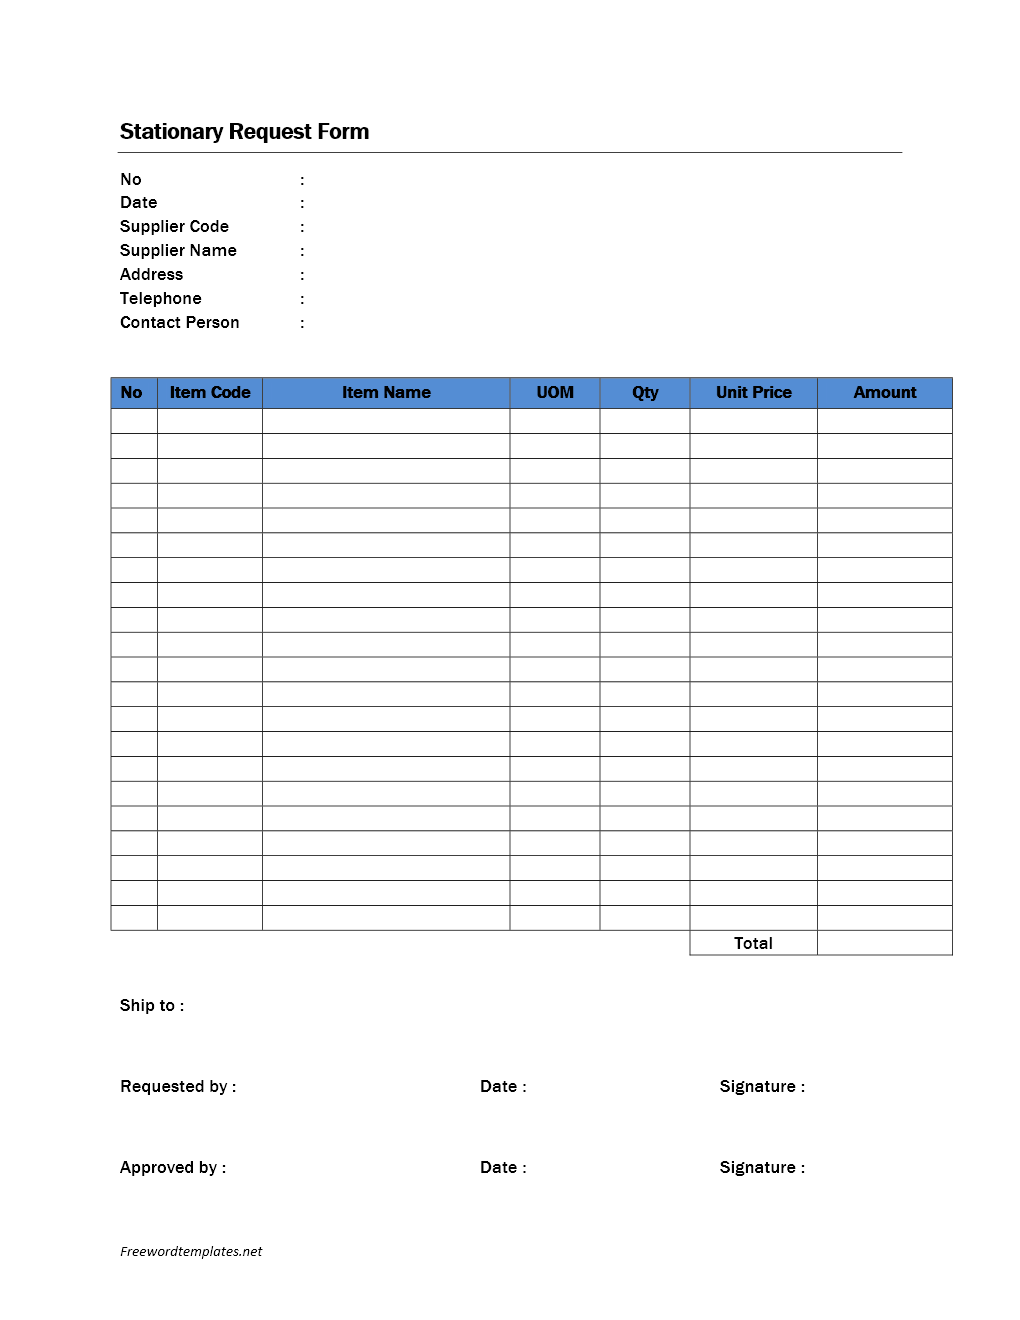 printable stationery form Archives | Freewordtemplates.net